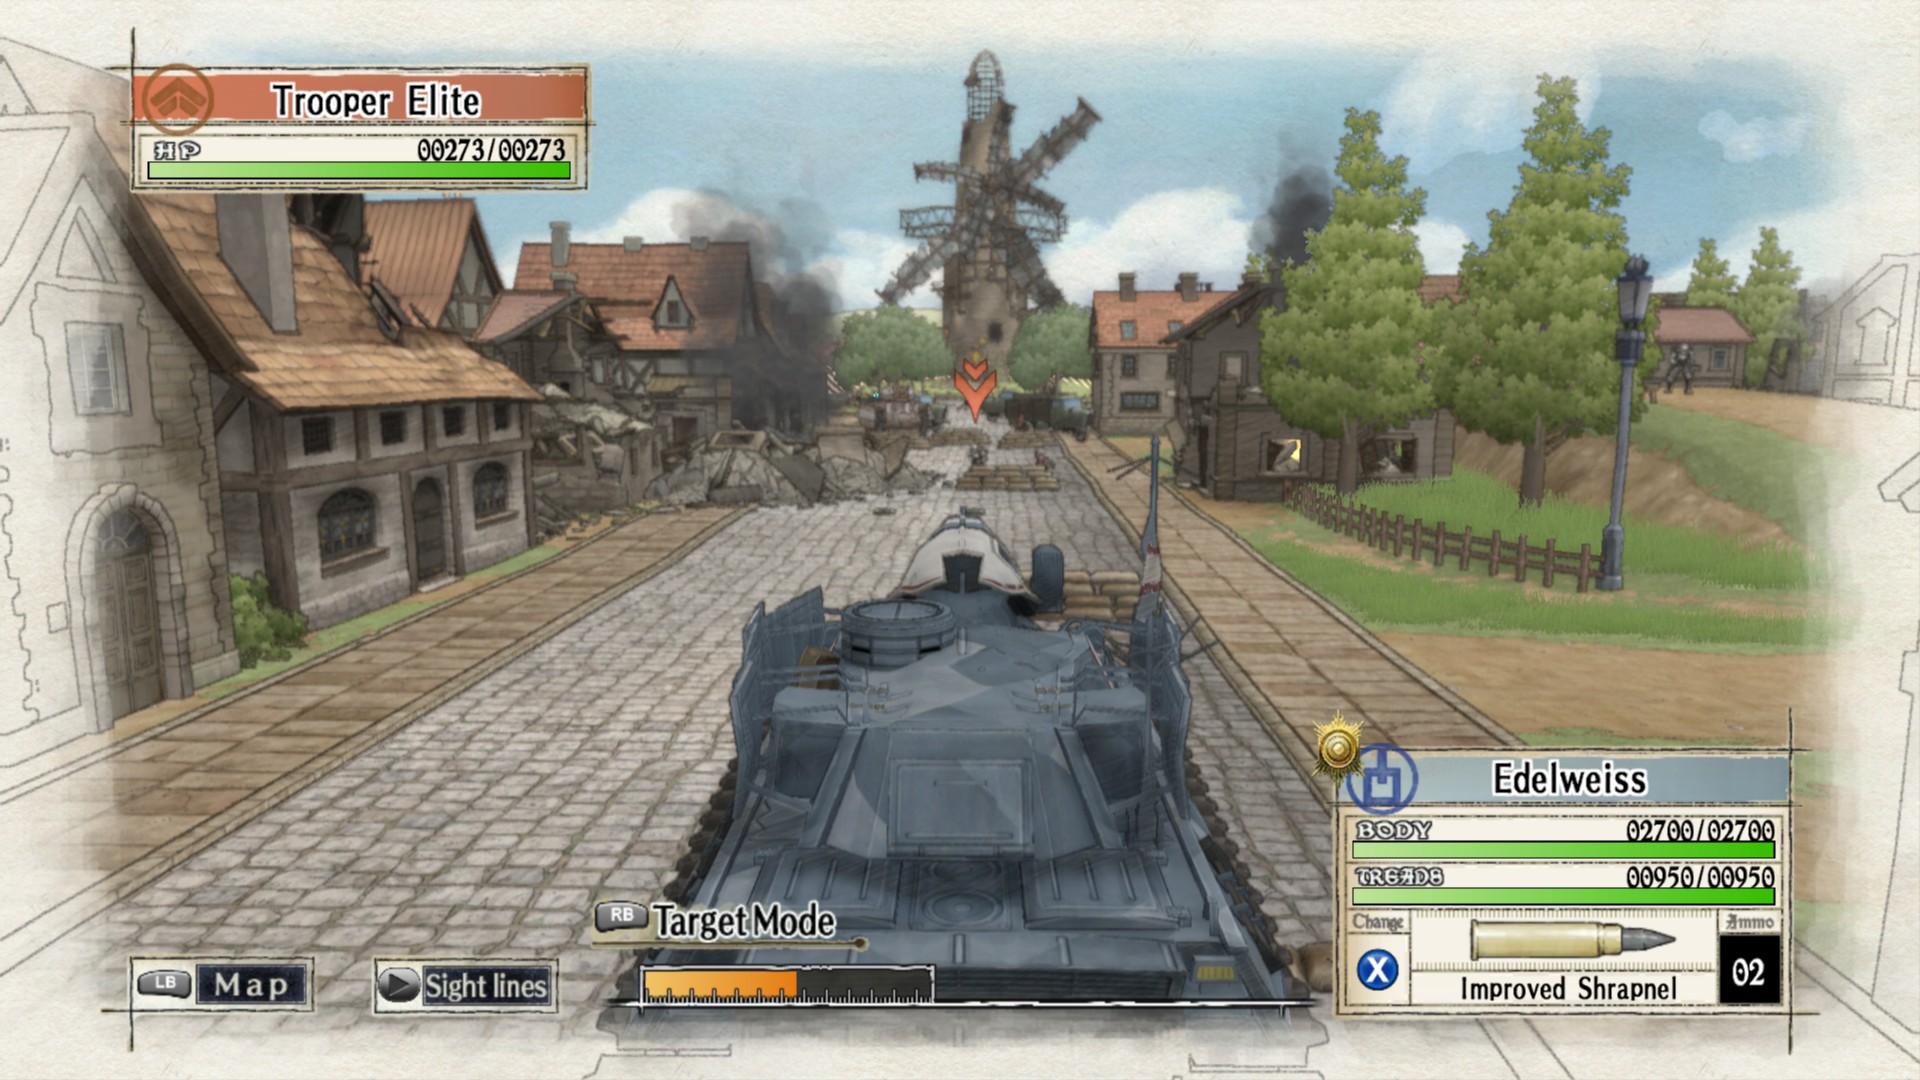 A tank can be used to annihilate your enemies